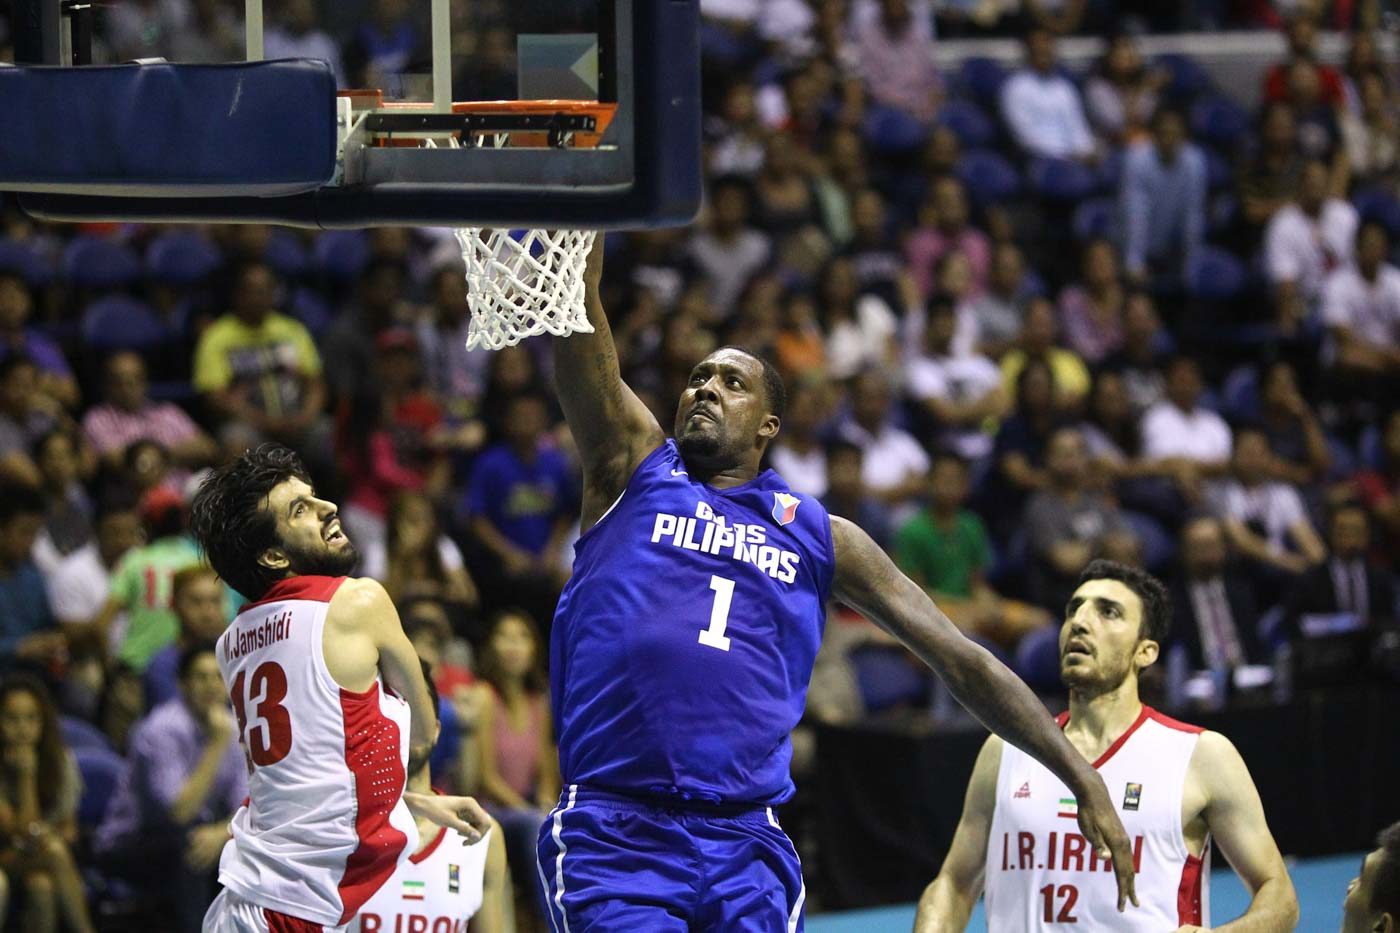 Gilas gets blown out by 35 against Turkey